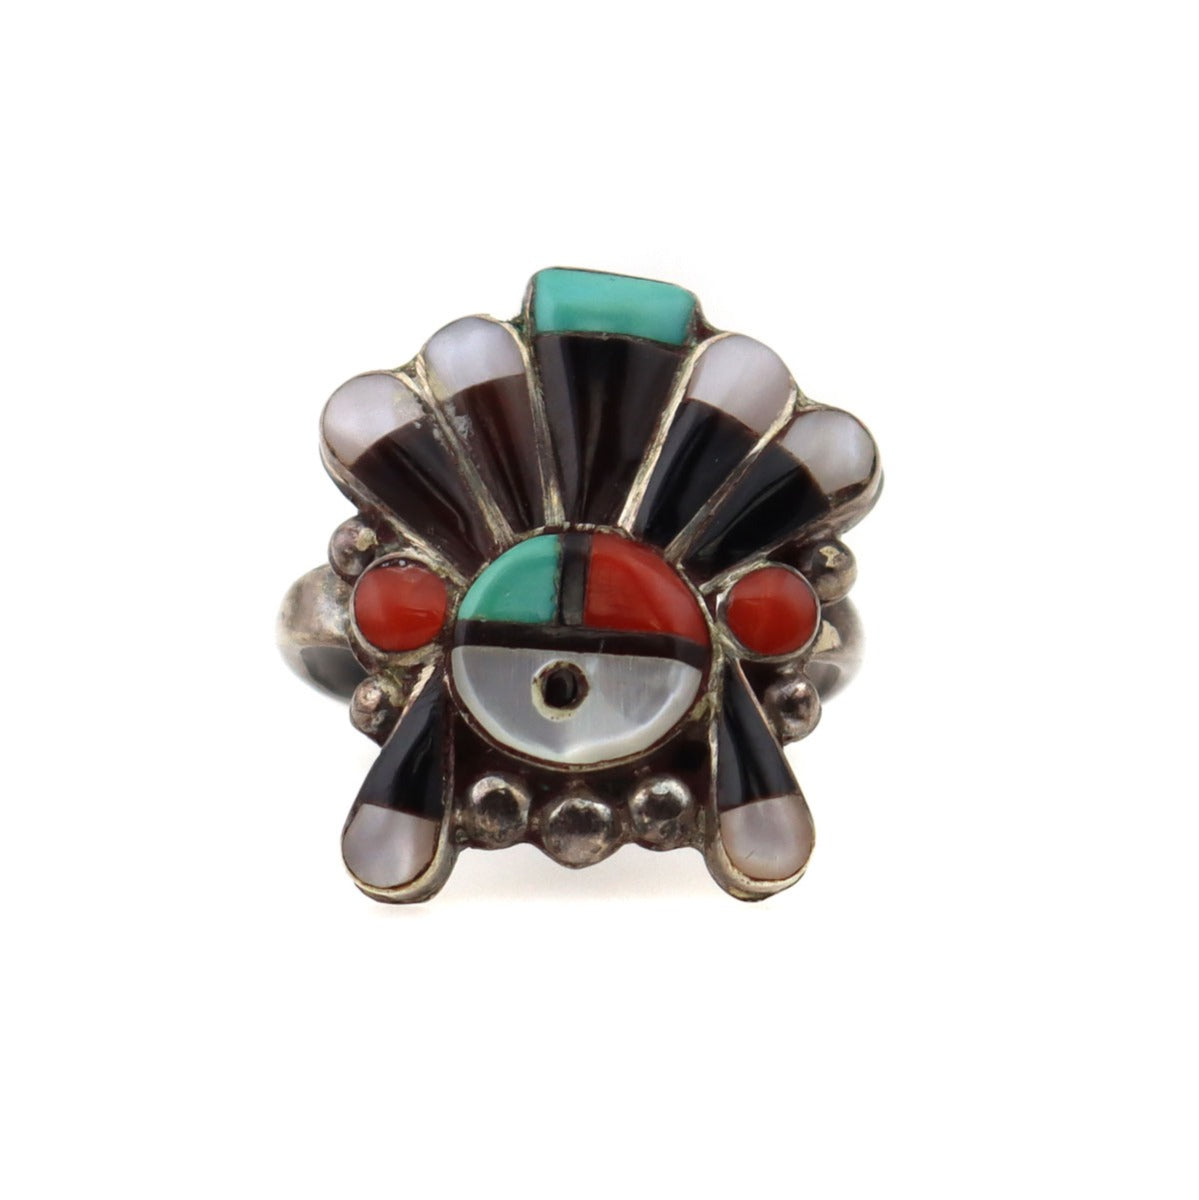 Zuni Multi-Stone and Silver Ring with Sunface Kachina Design c. 1950-60s, size 4.5 (J13978)
